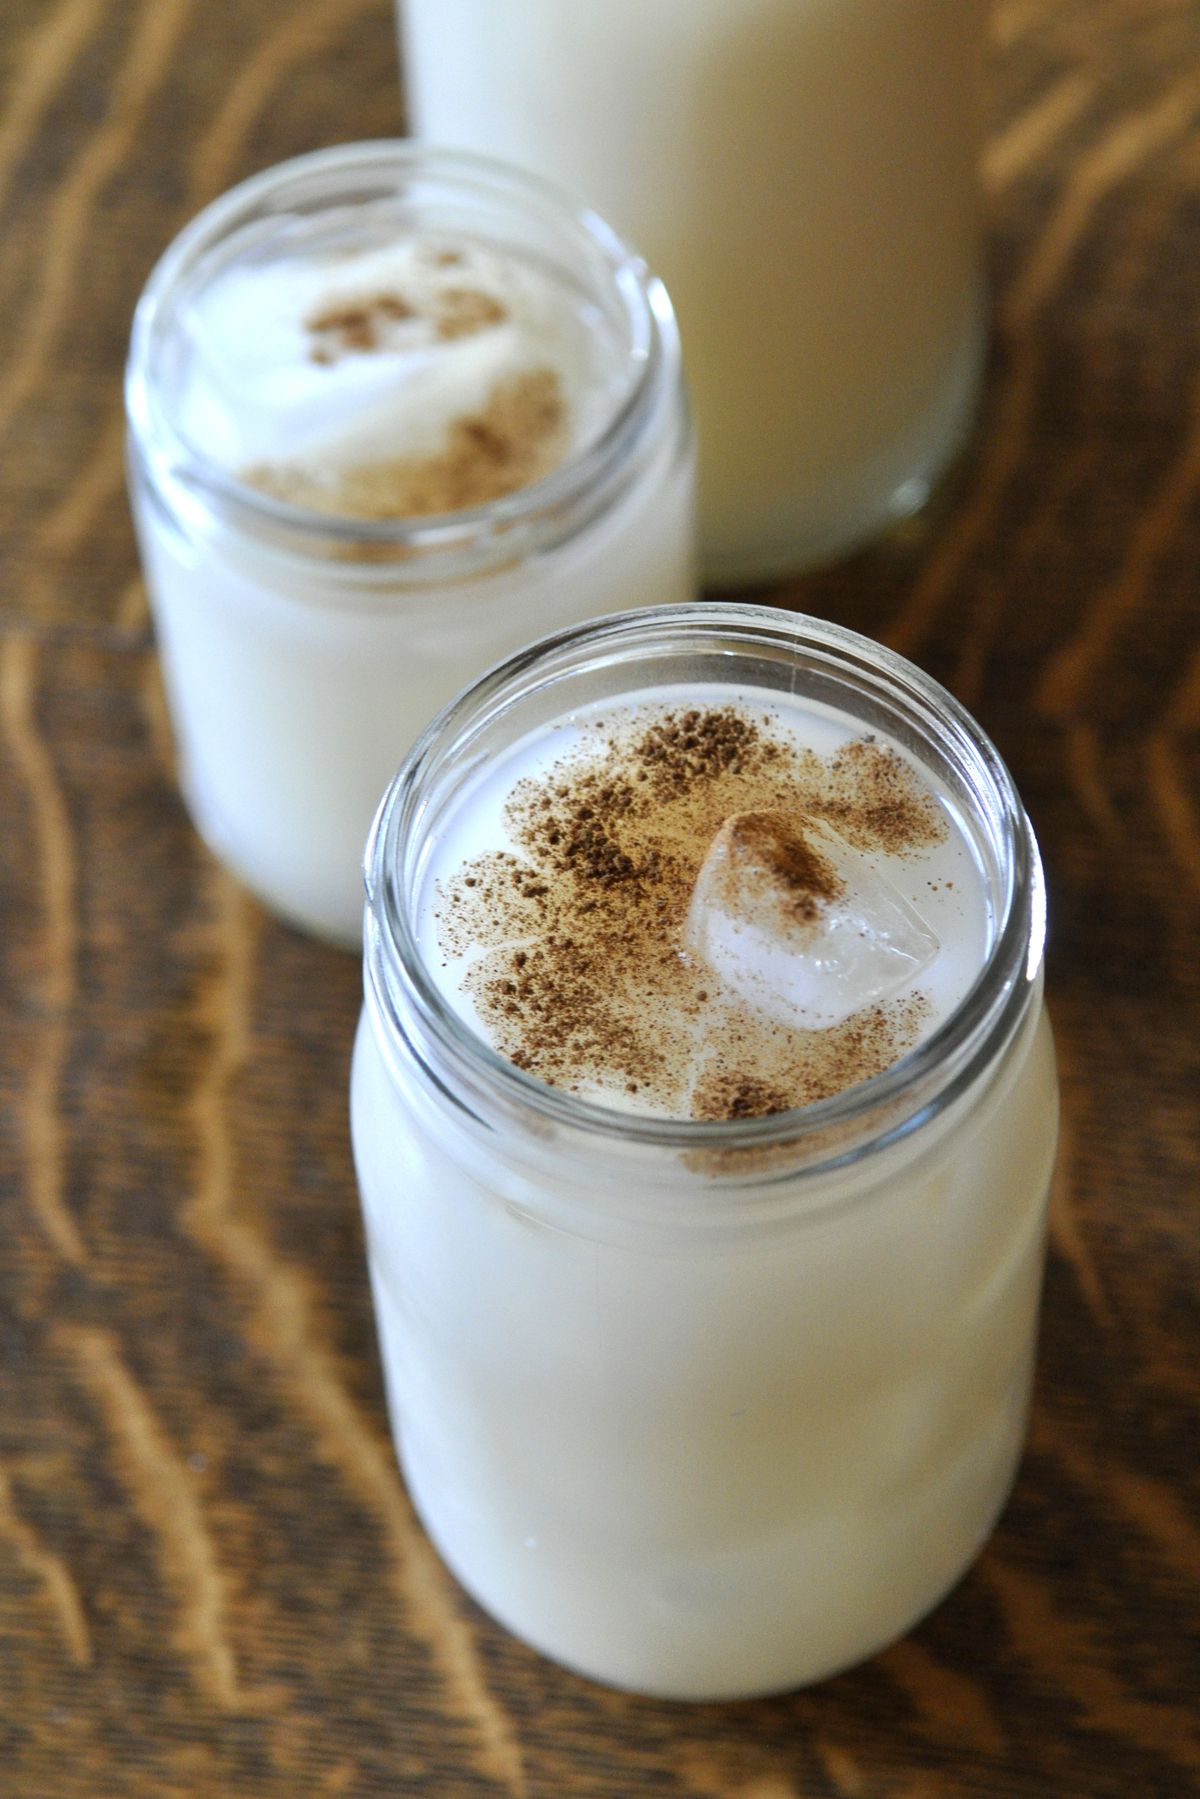 Horchata, made from water and rice, is served over ice, sweetened with sugar and scented with vanilla and ground cinnamon. (Adriana Janovich)